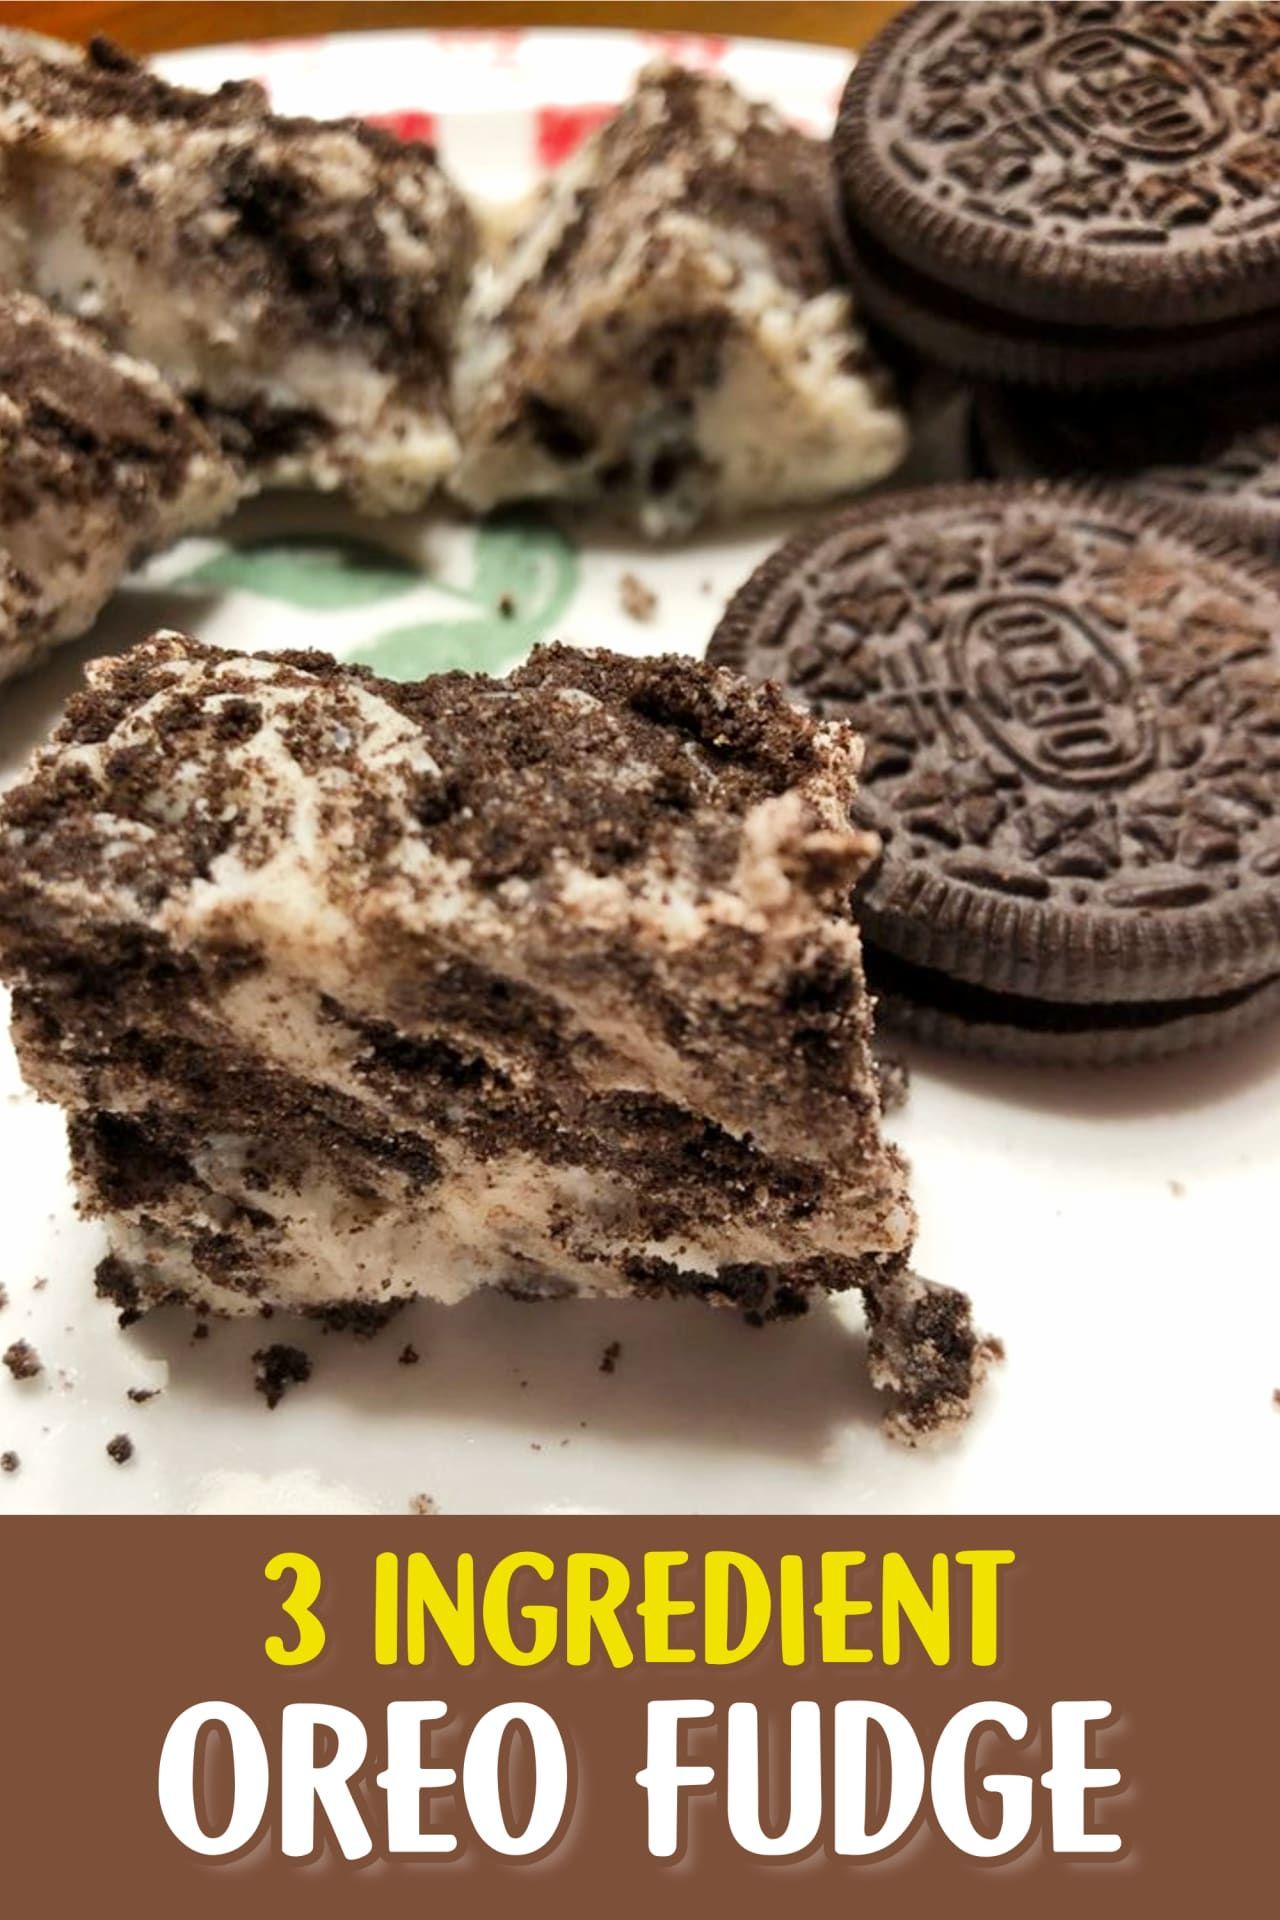 Easy 3 Ingredient Fudge Recipes - Super Simple Sweet Treats For a Crowd, For Parties or as Easy Homemade Dessert Gifts -   16 desserts Creative parties ideas